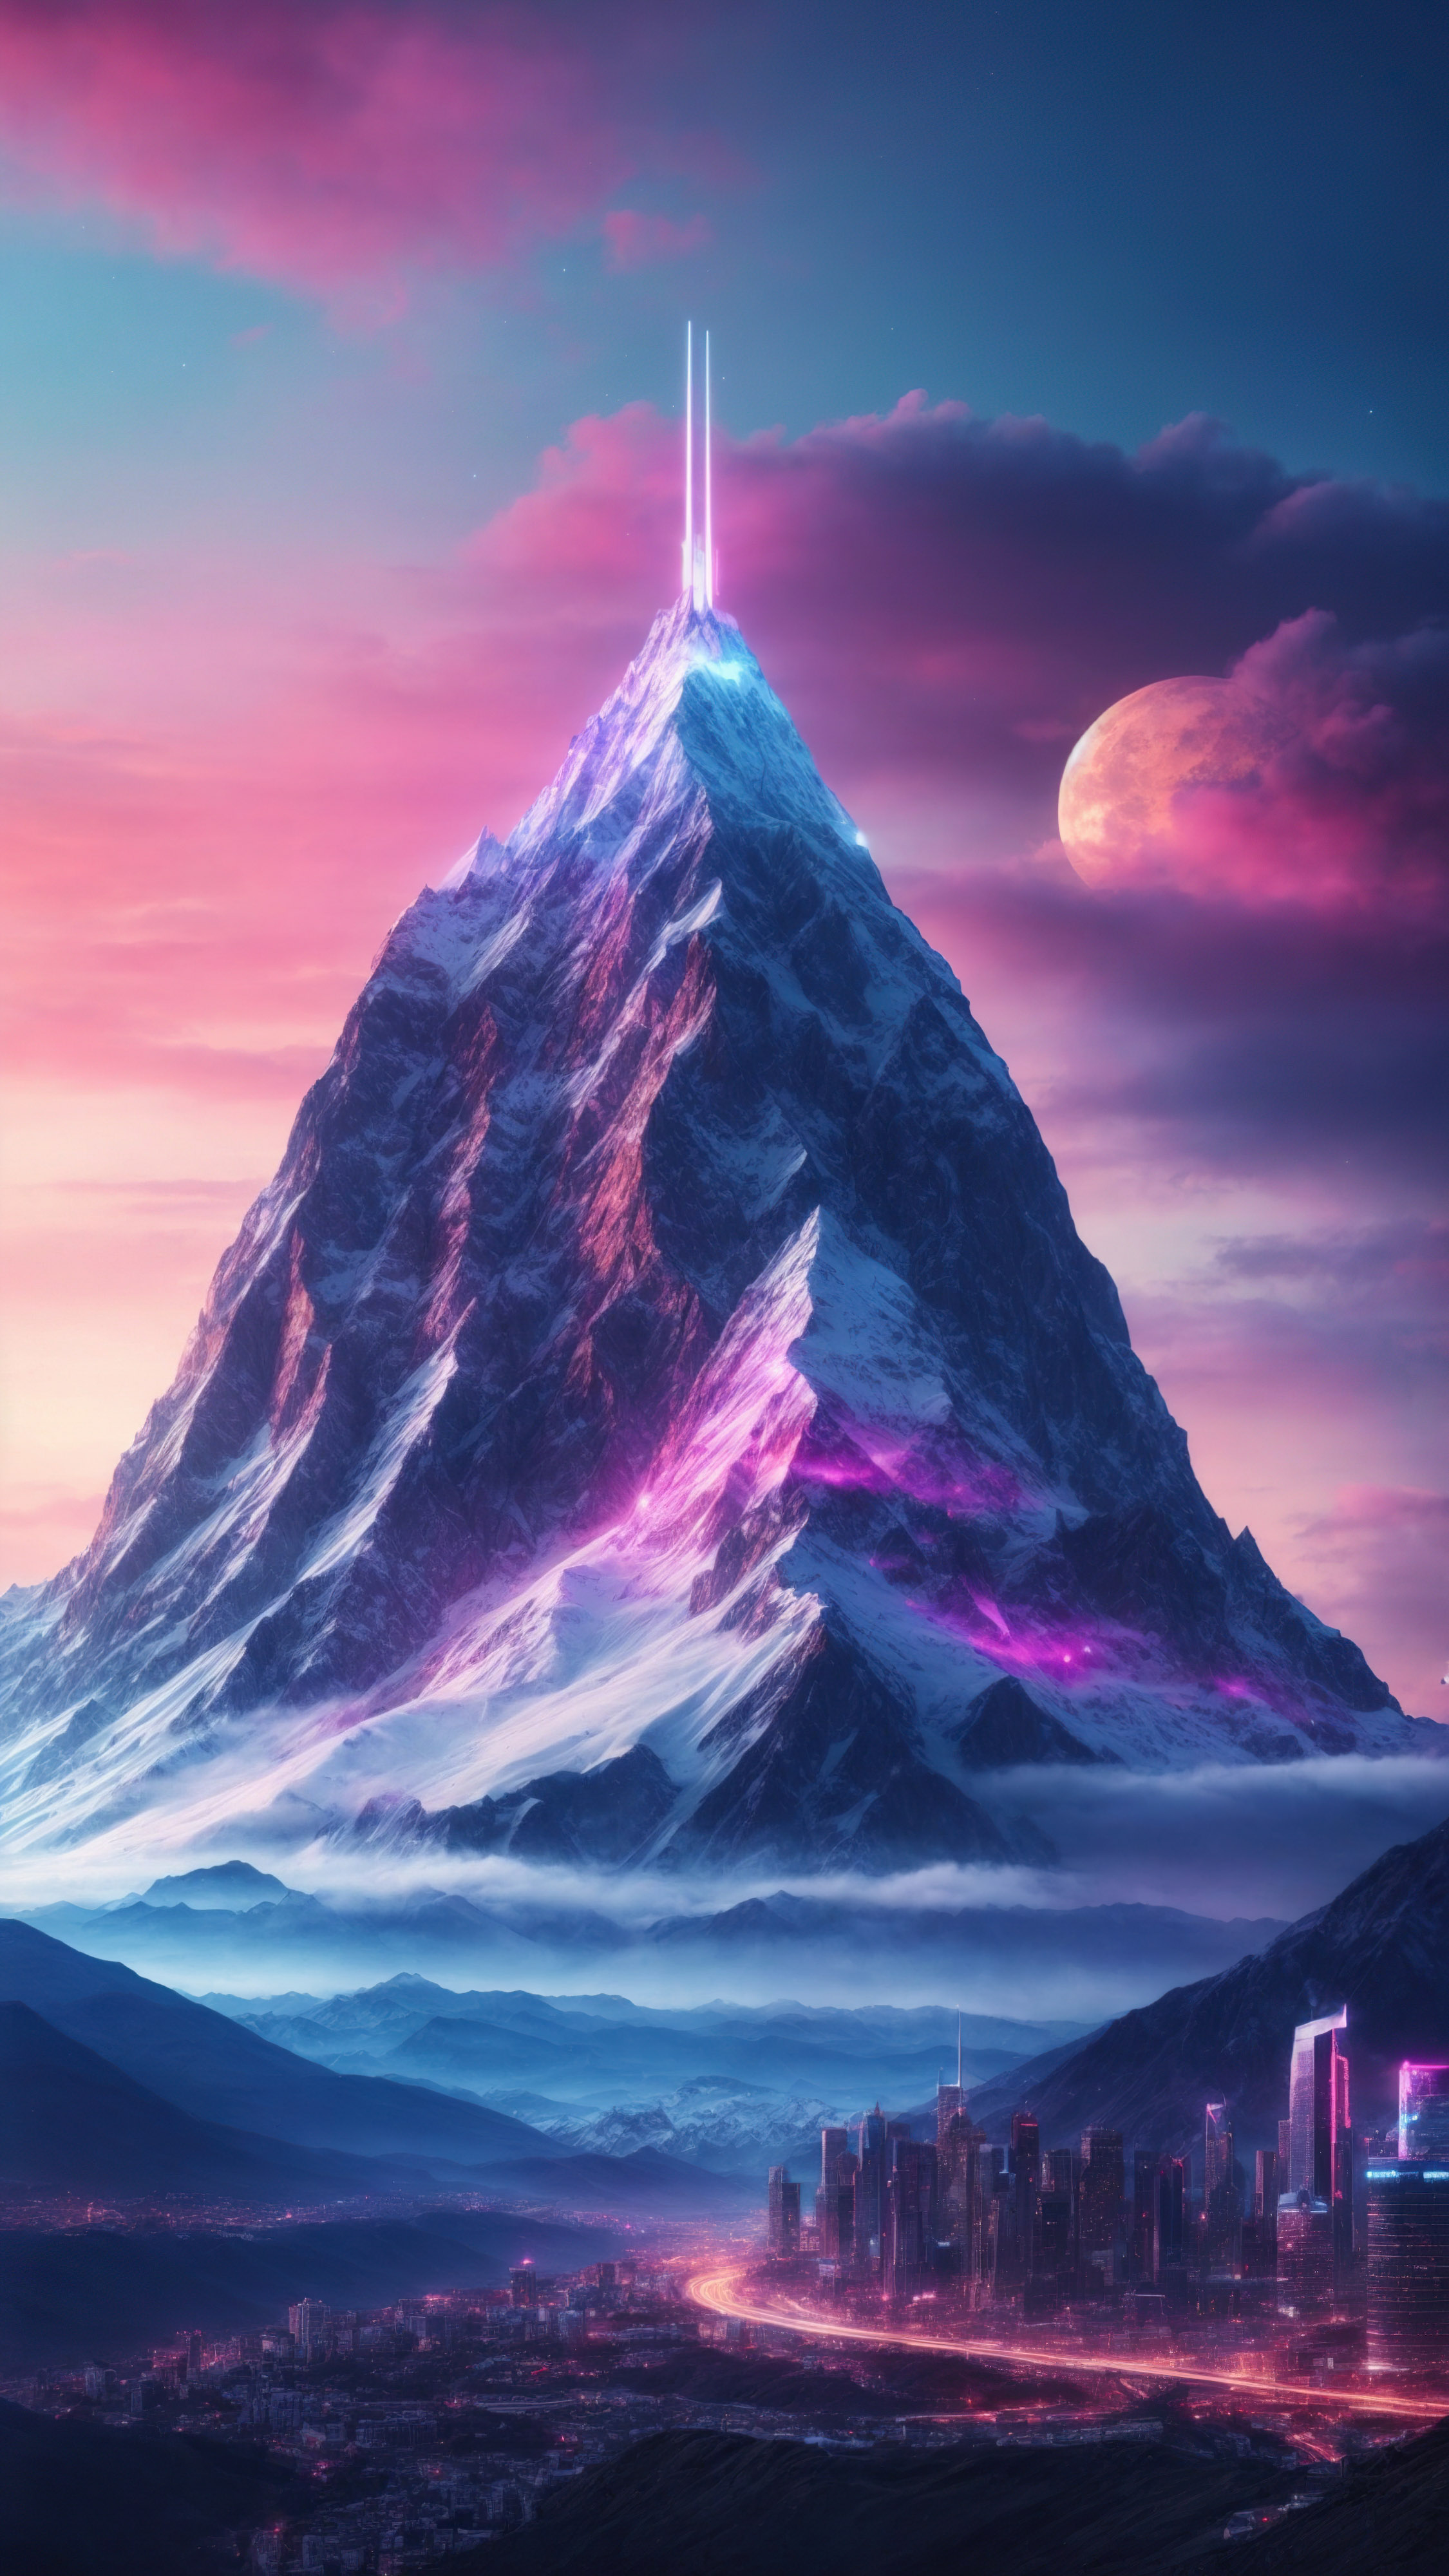 Step into the future with our purple mountain wallpaper for iPhone, showcasing a futuristic mountain with a city and a spaceship, under a neon sky and a star.